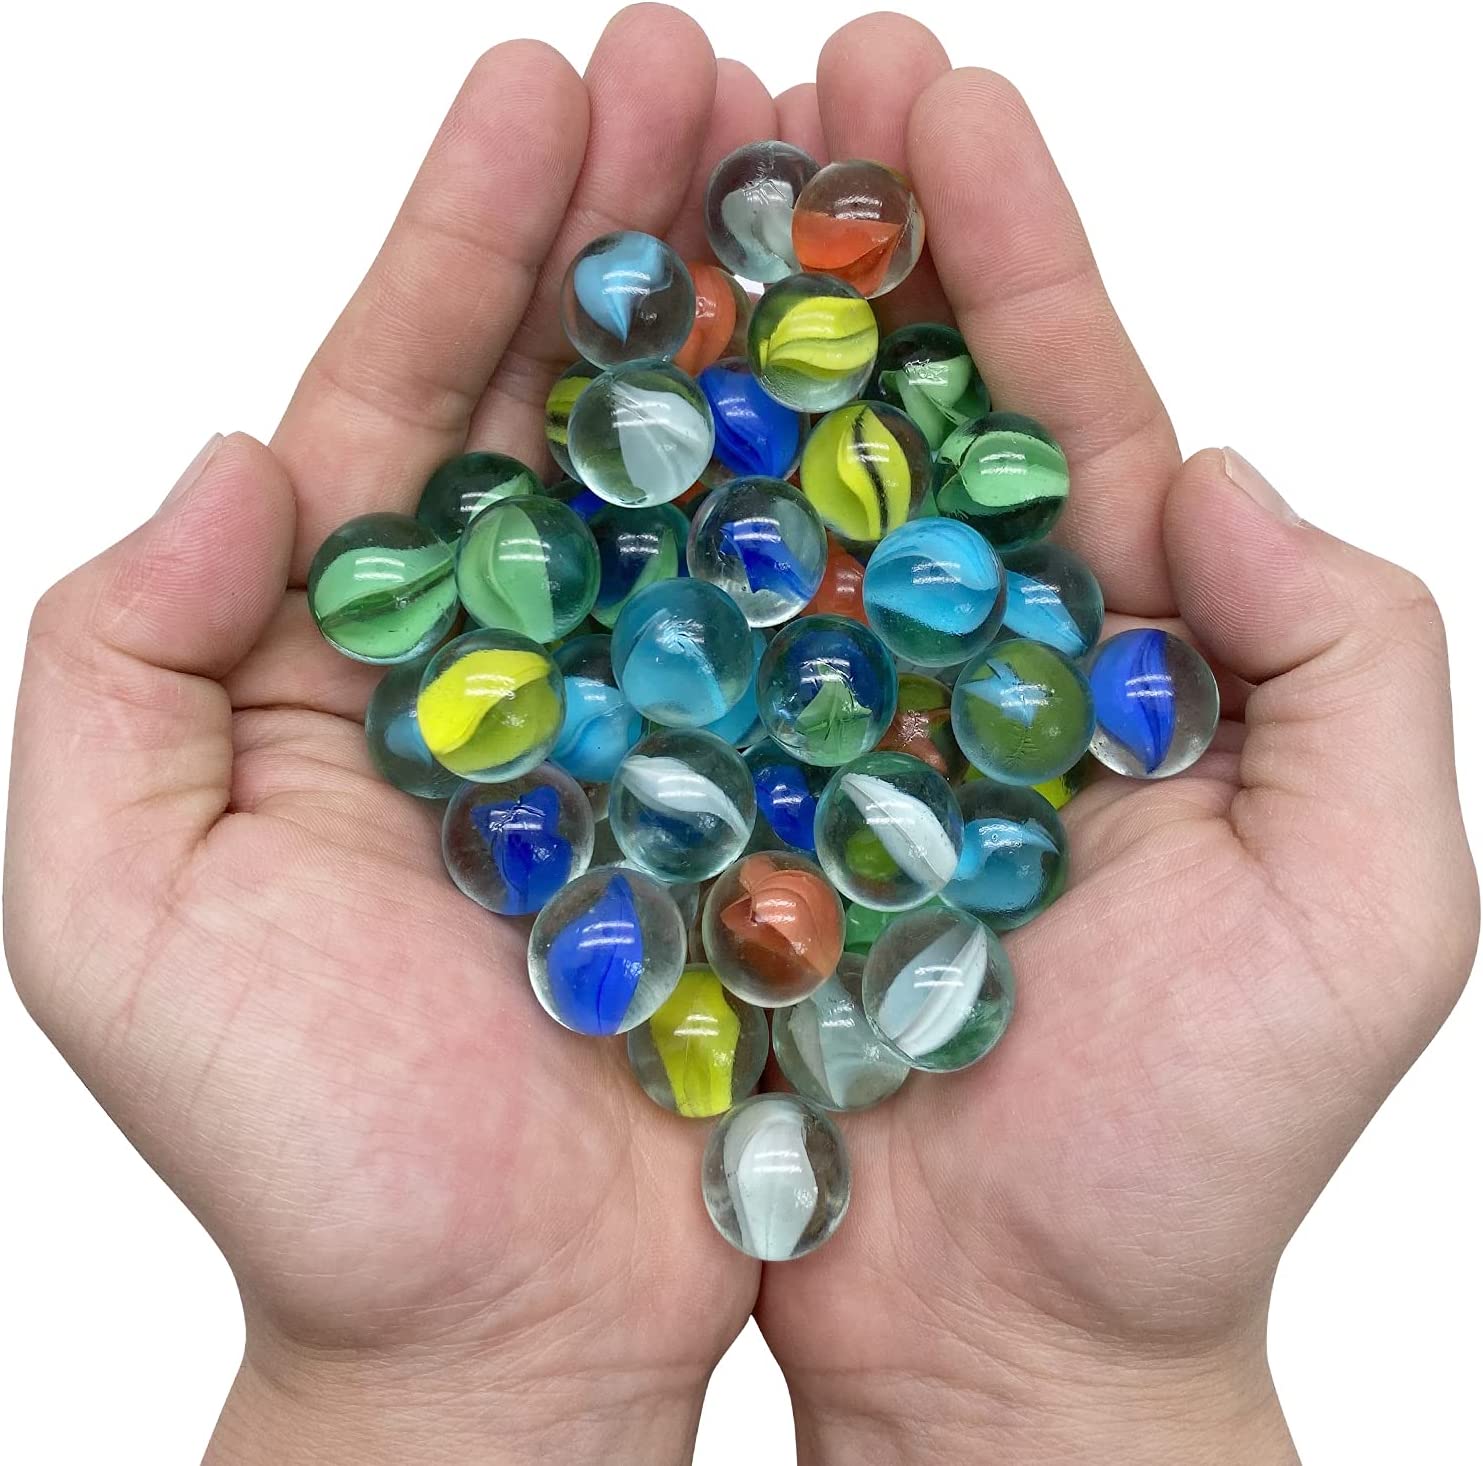 Vruomi 42 Pcs Marbles Glass Marbles for Kids,40 Colorful Assorted Marbles,2 Glow in The Dark Glass Marbles,Cats Eyes Marbles Bulk for DIY and Home